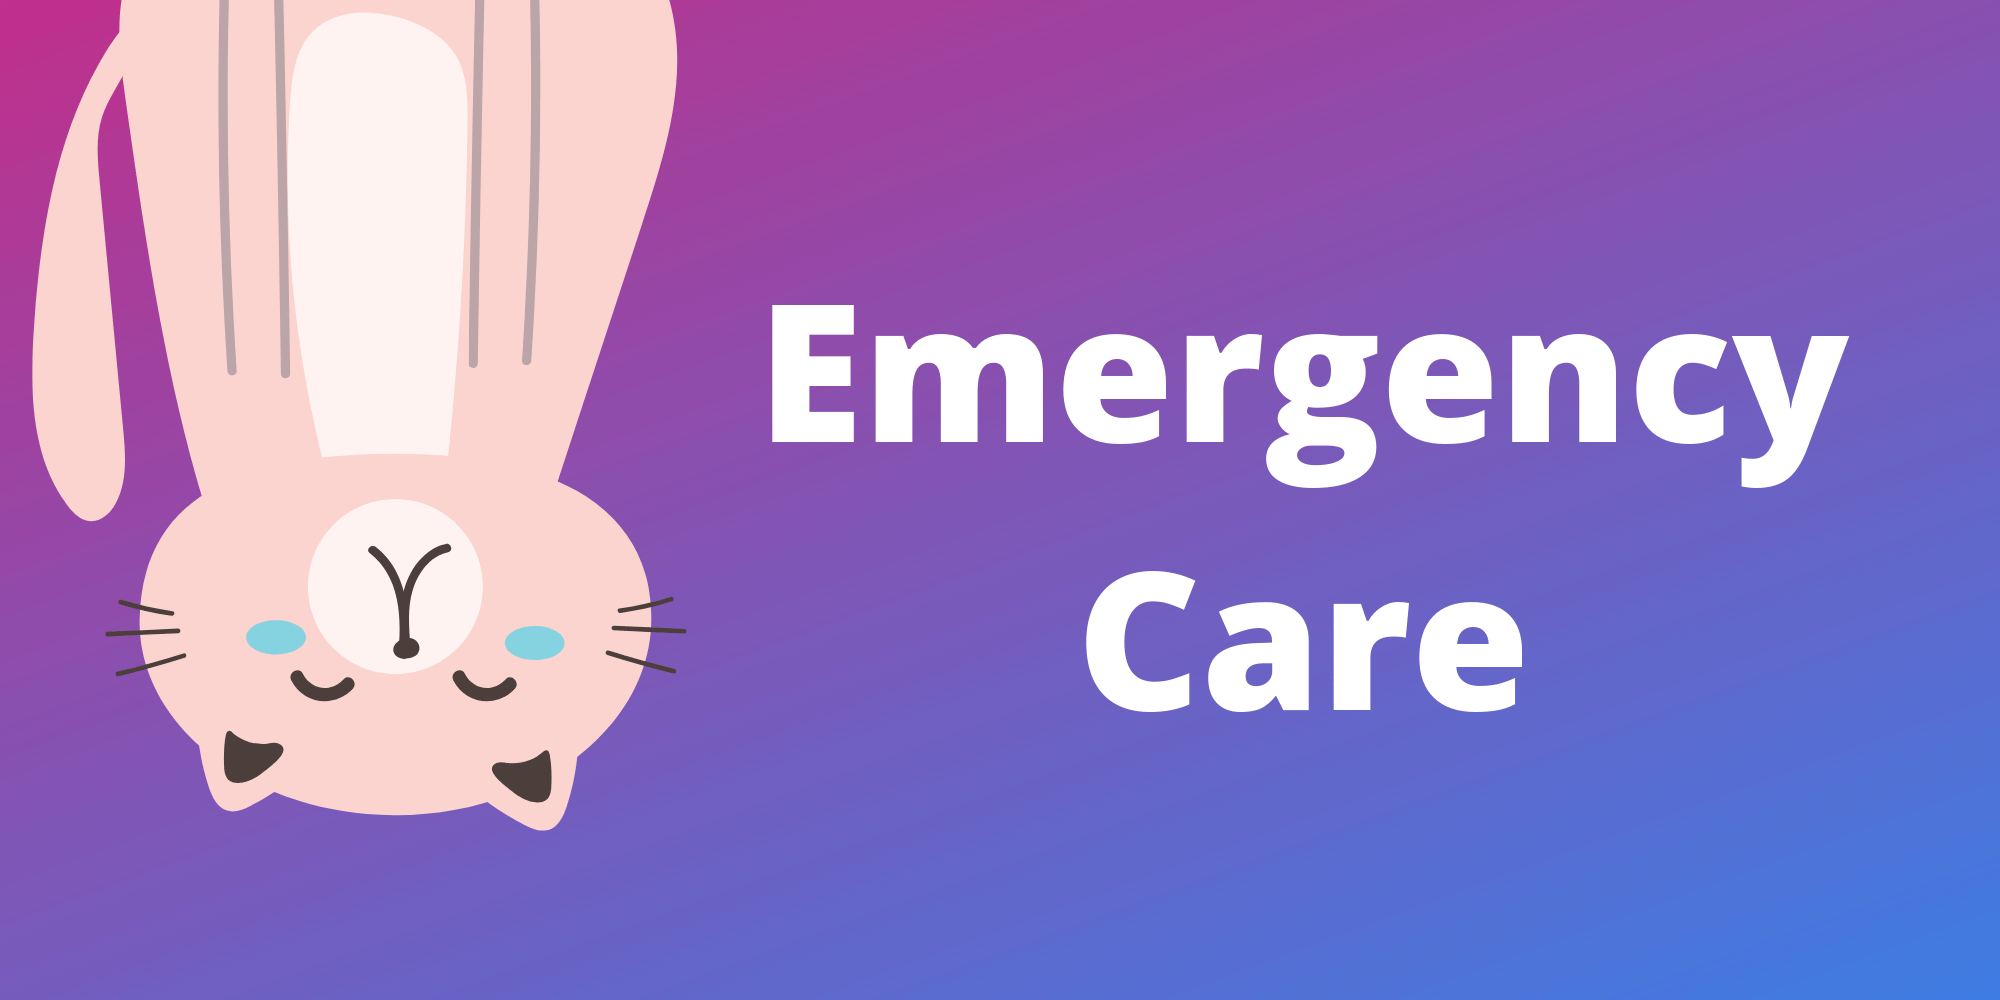 Emergency Care Tips for Cat Sitting